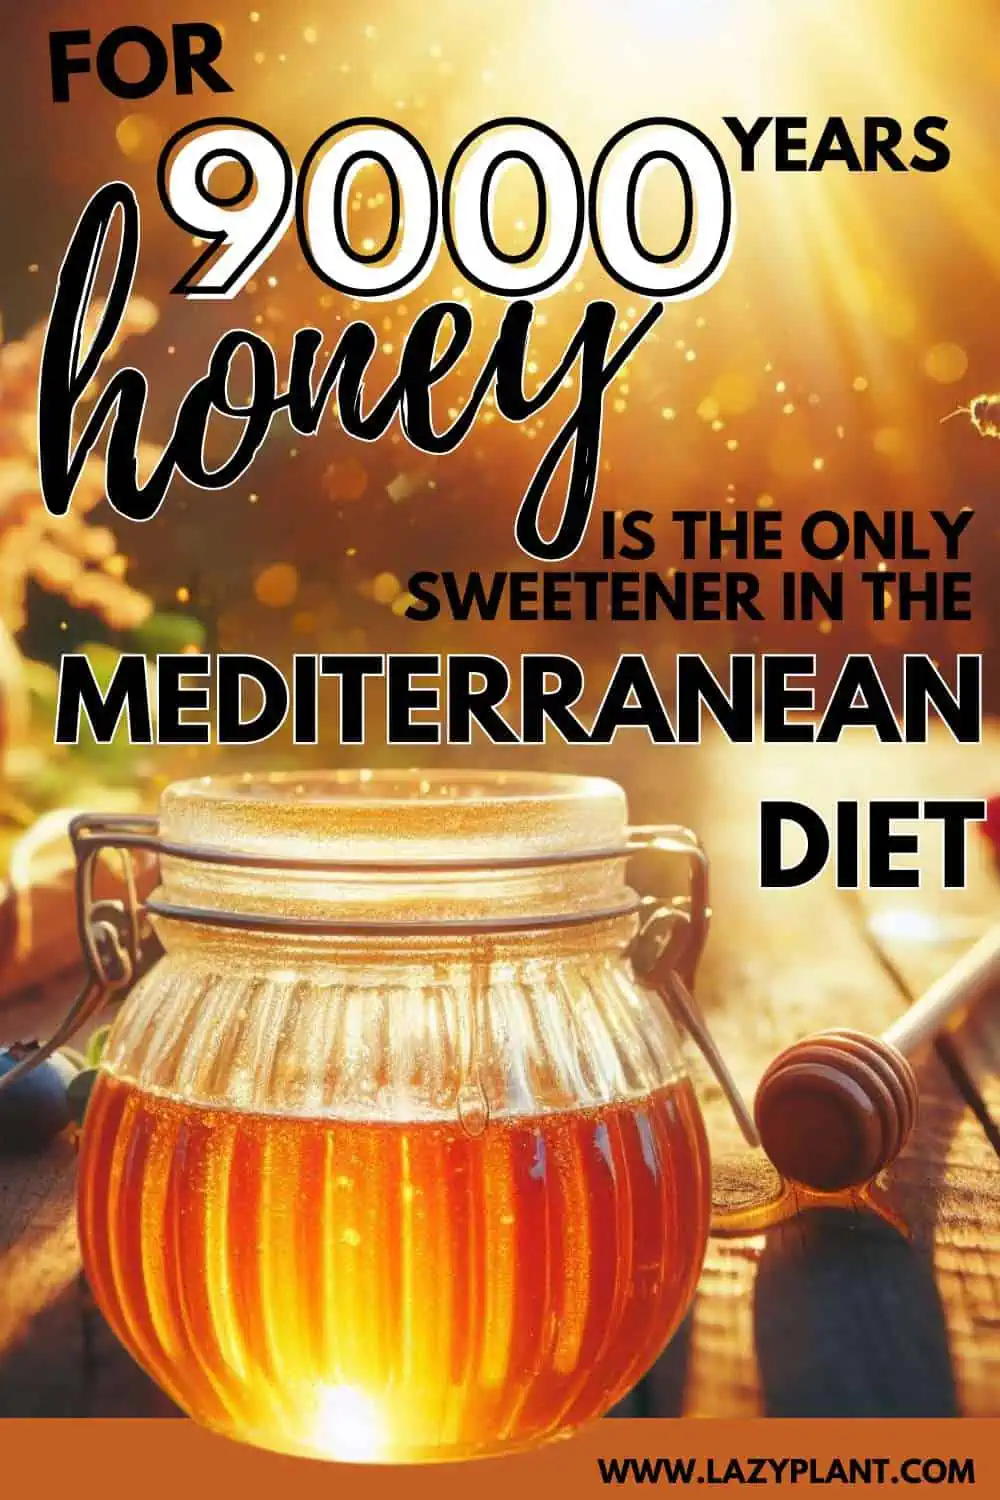 Honey is the sweetener on the Mediterranean diet for thousands of years!